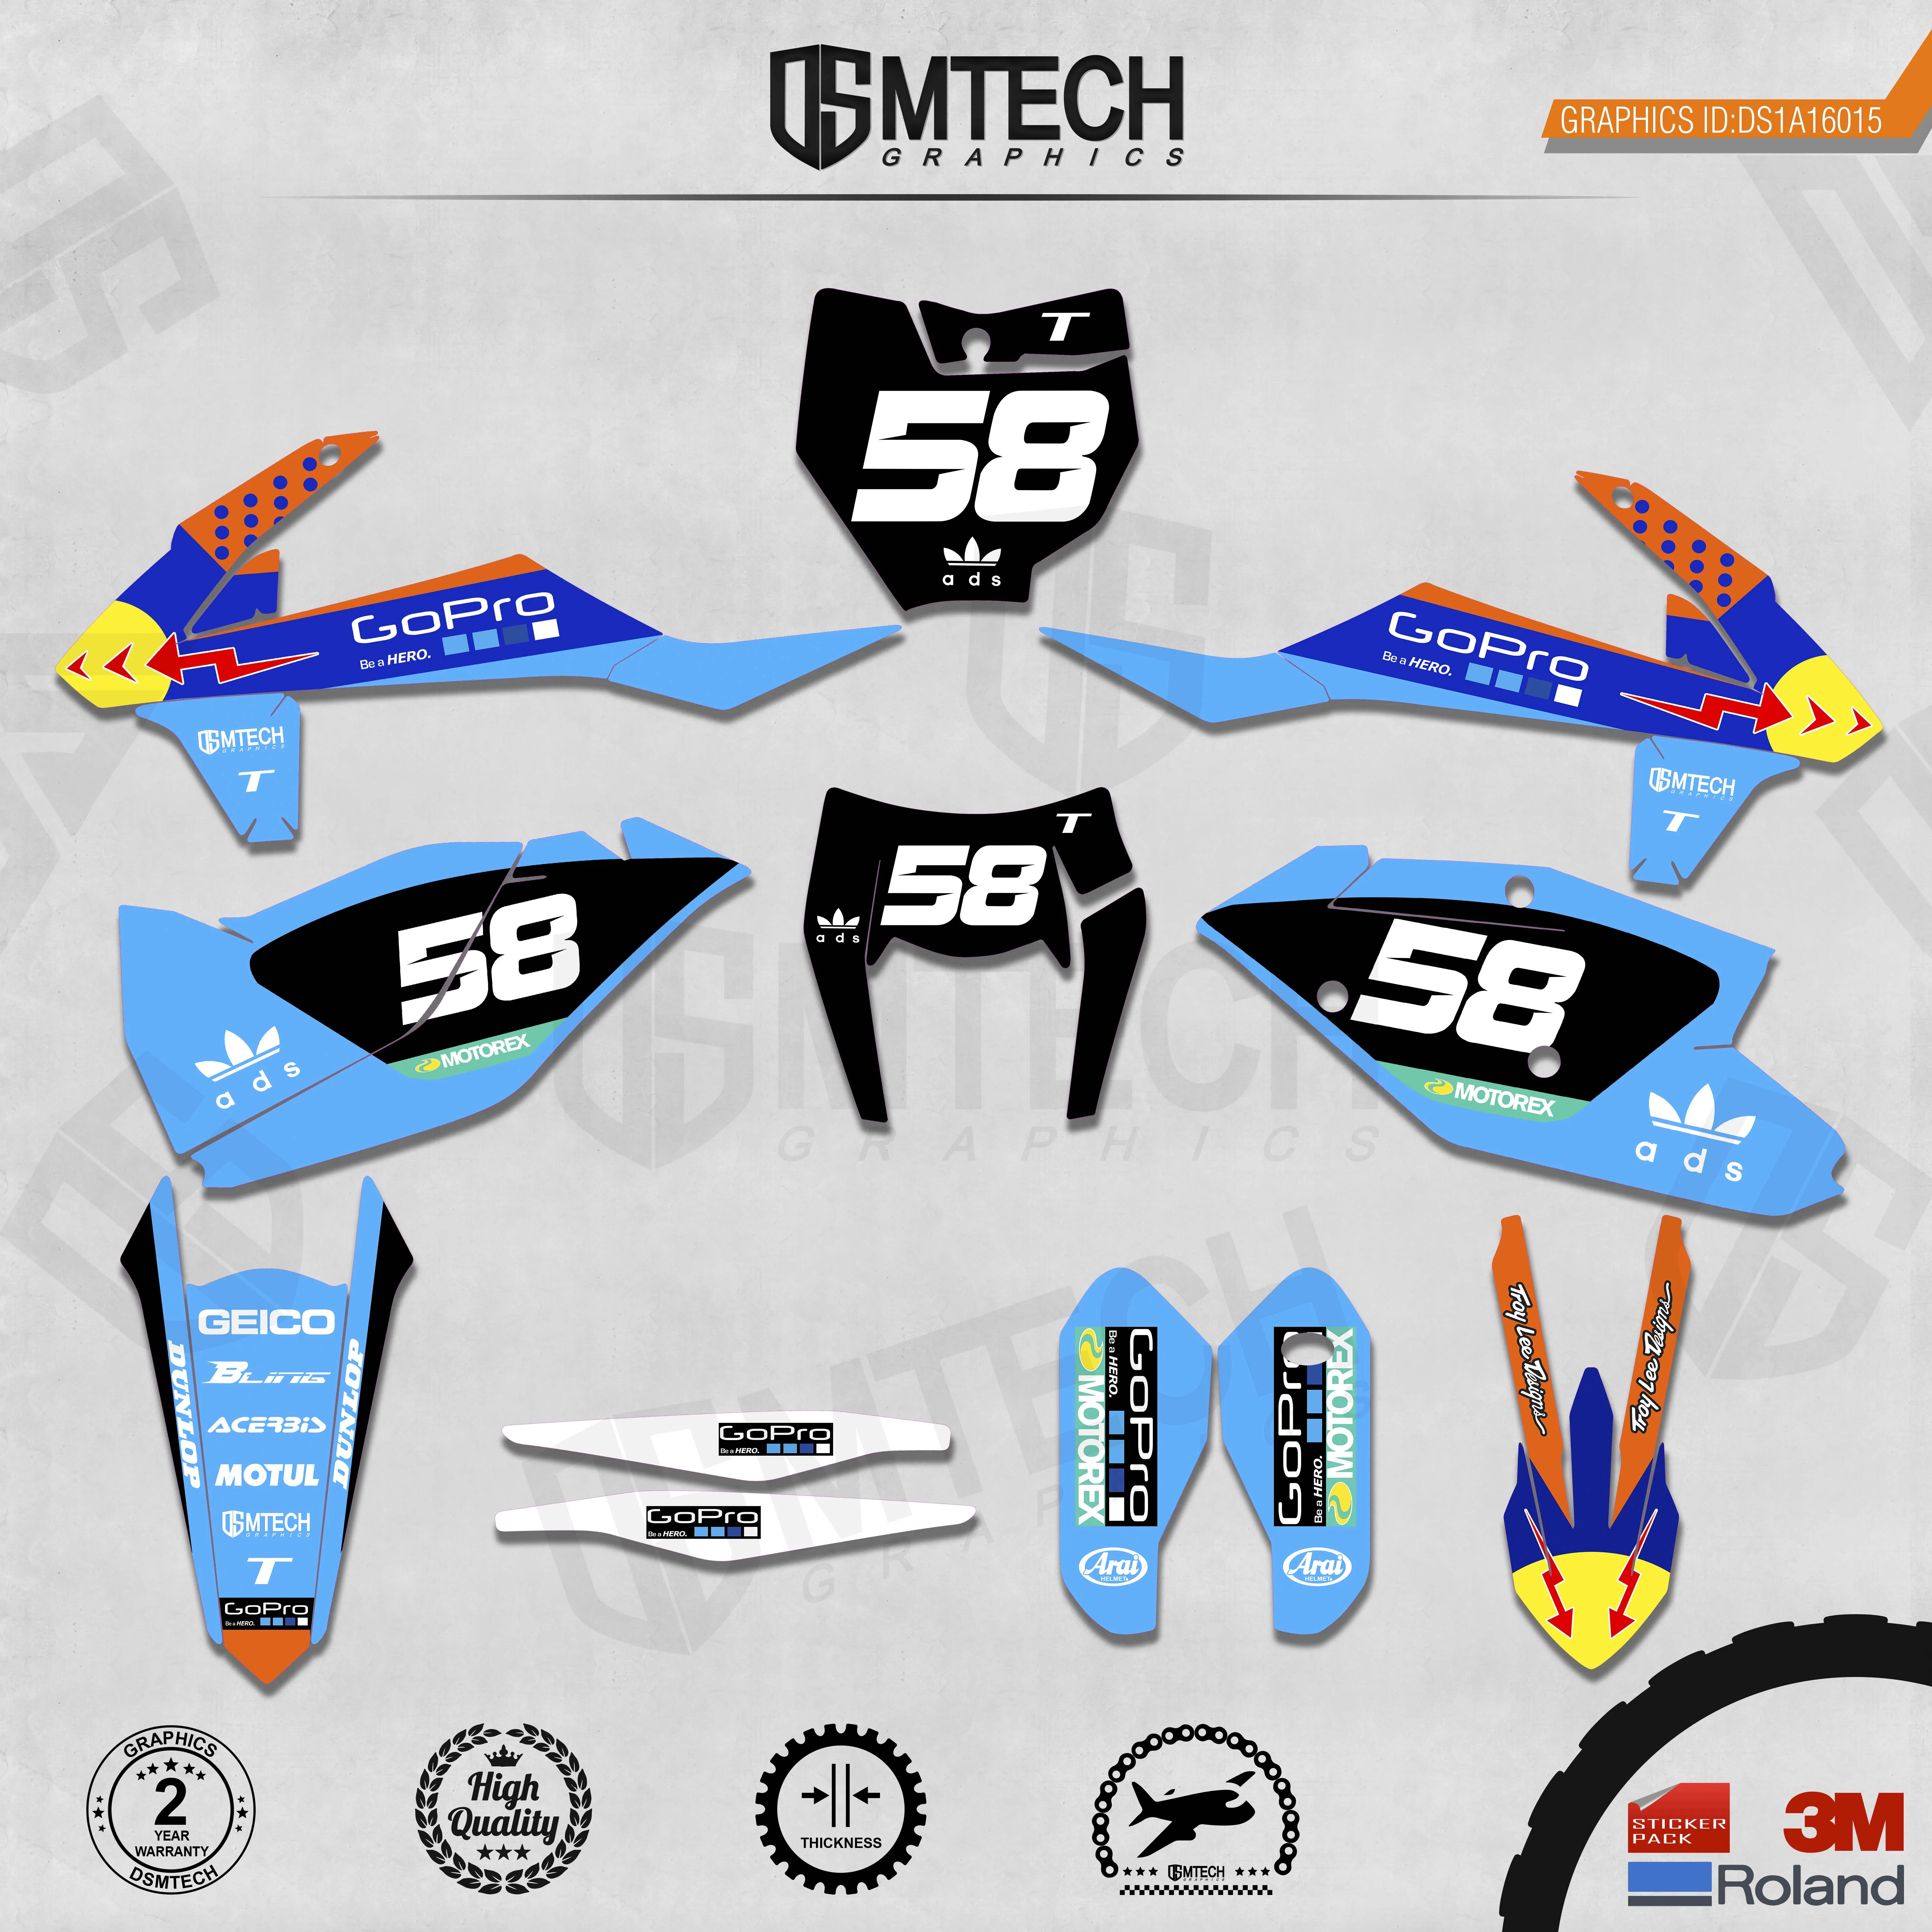 DSMTECH Customized Team Graphics Backgrounds Decals 3M Custom Stickers For KTM 2017-2019 EXC 2016-2018 SXF  015